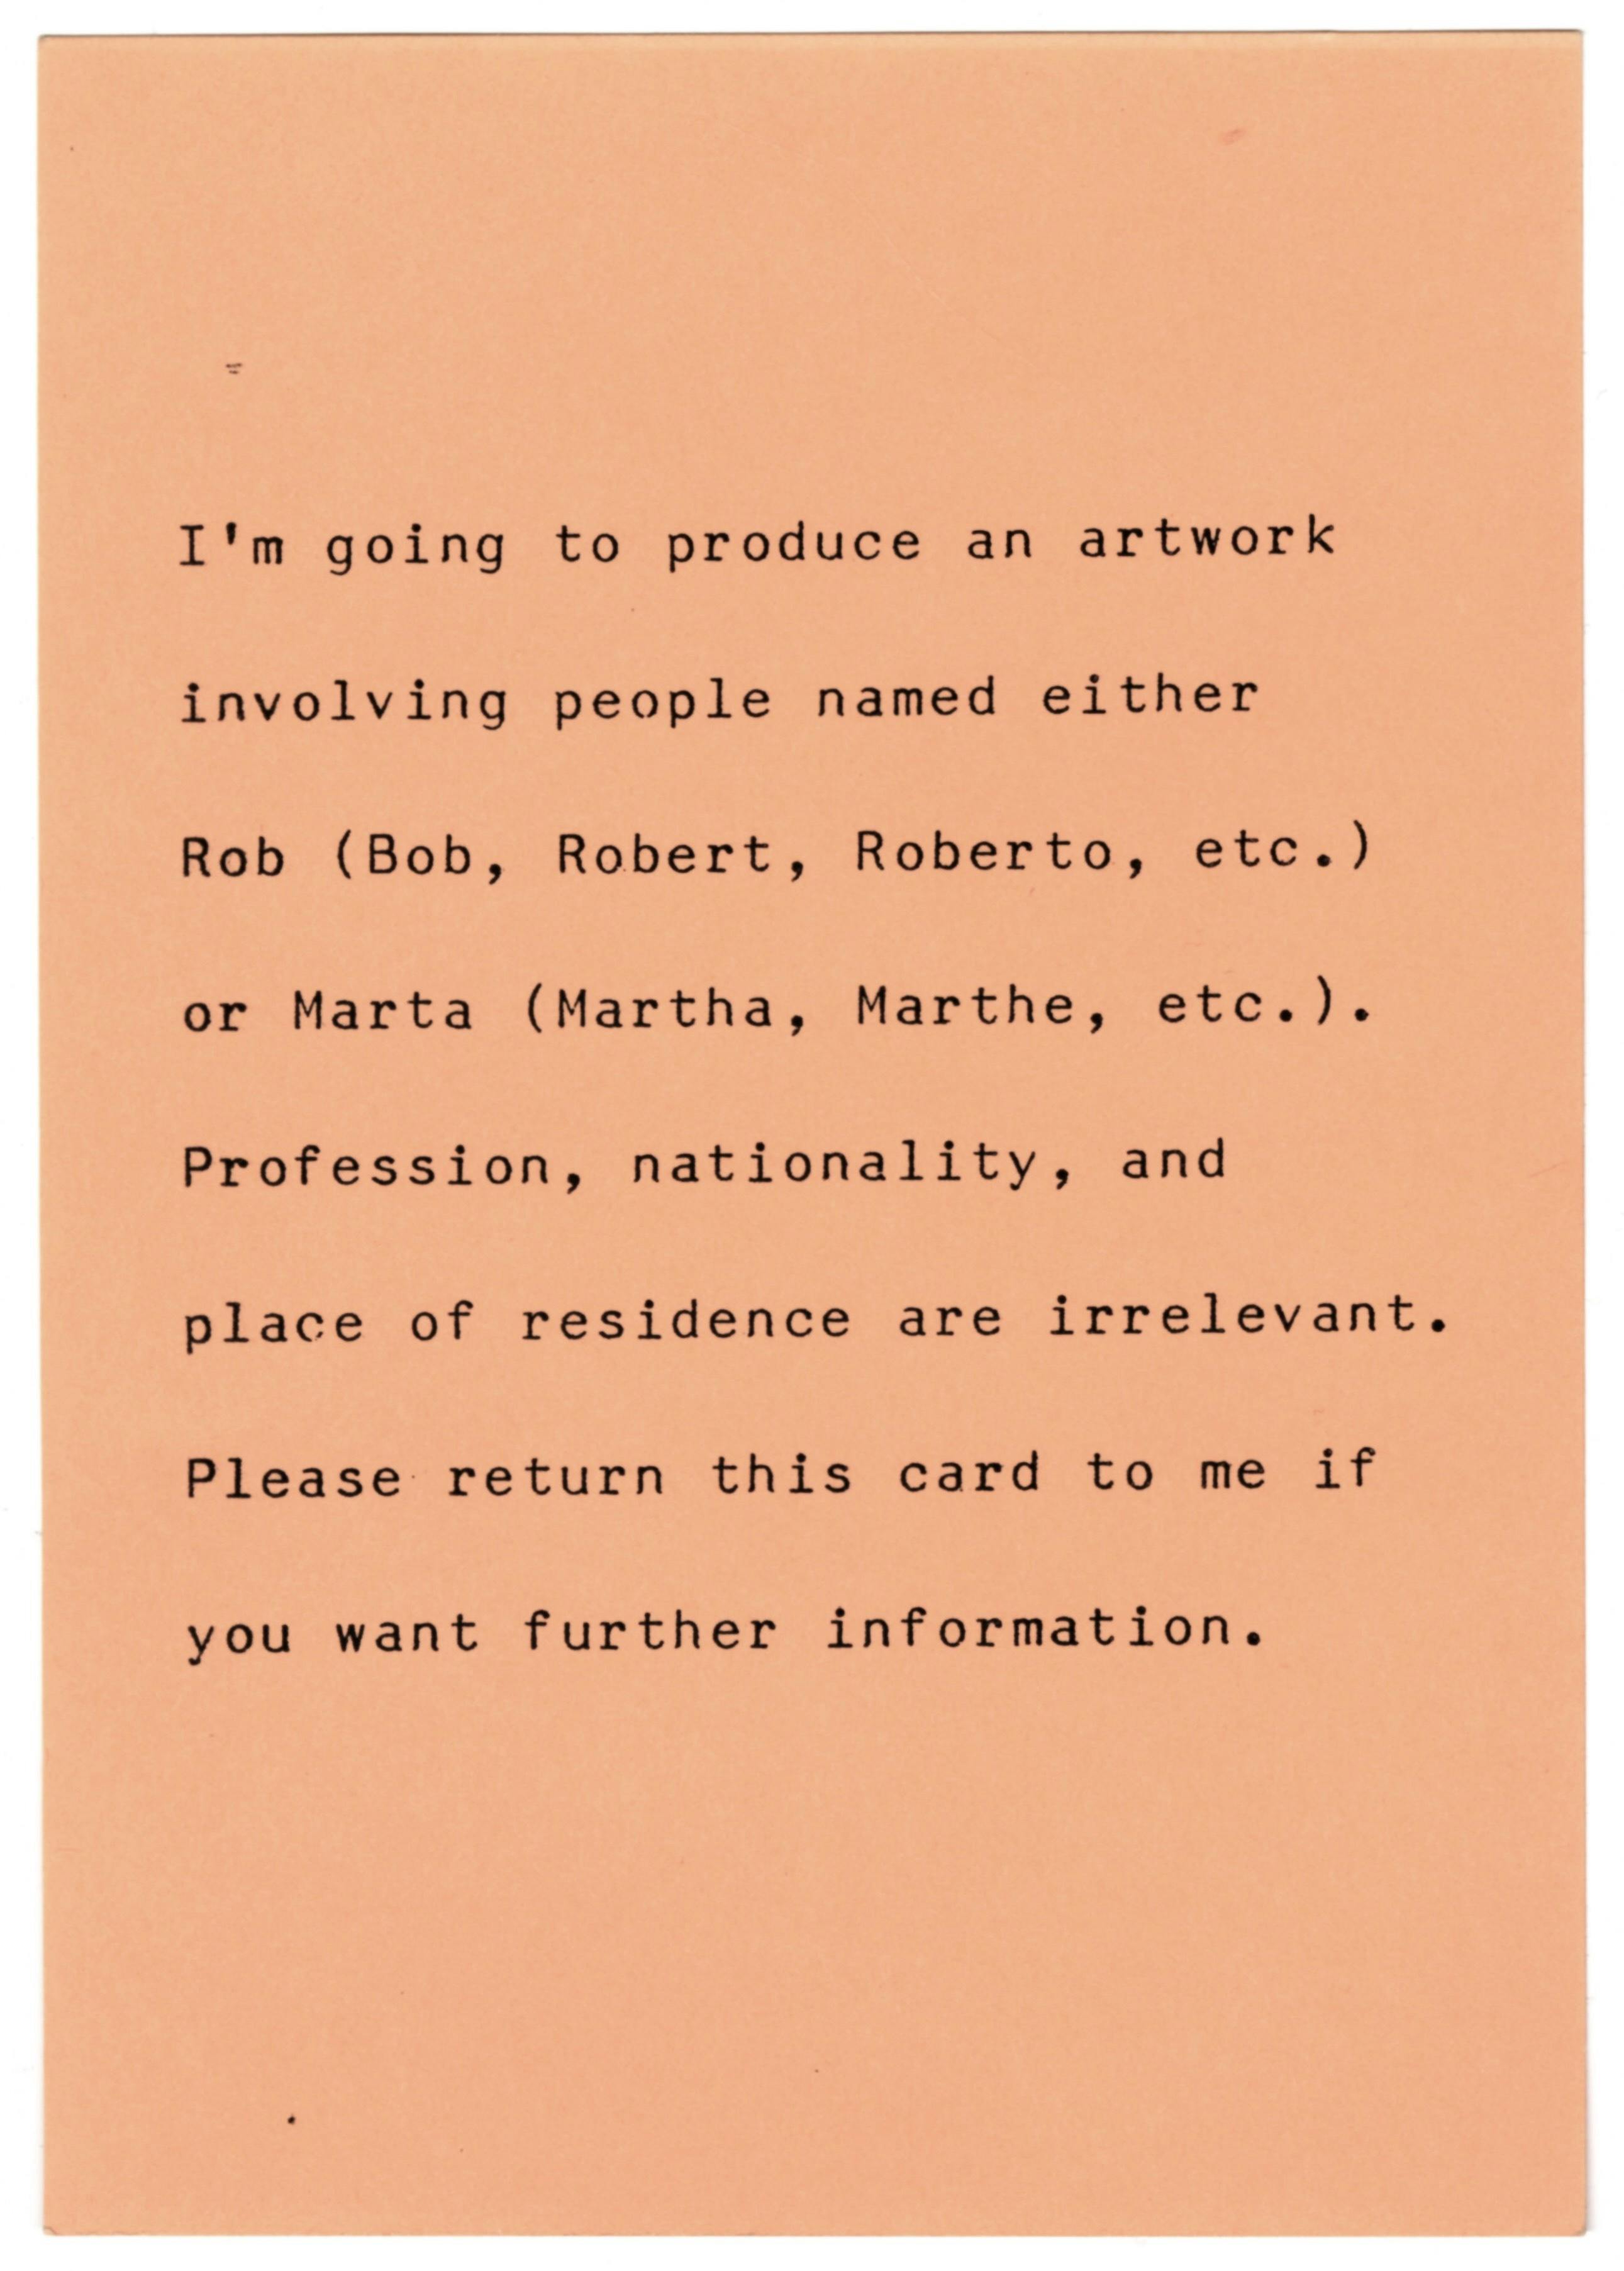 A vertical pink postcard printed with black text, which reads, “I’m going to produce an artwork involving people named either Rob (Bob, Robert, Roberto, etc.) or Marta (Martha, Marthe, etc.). Profession, nationality, and place of residence are irrelevant. Please return this card to me if you want further information.”